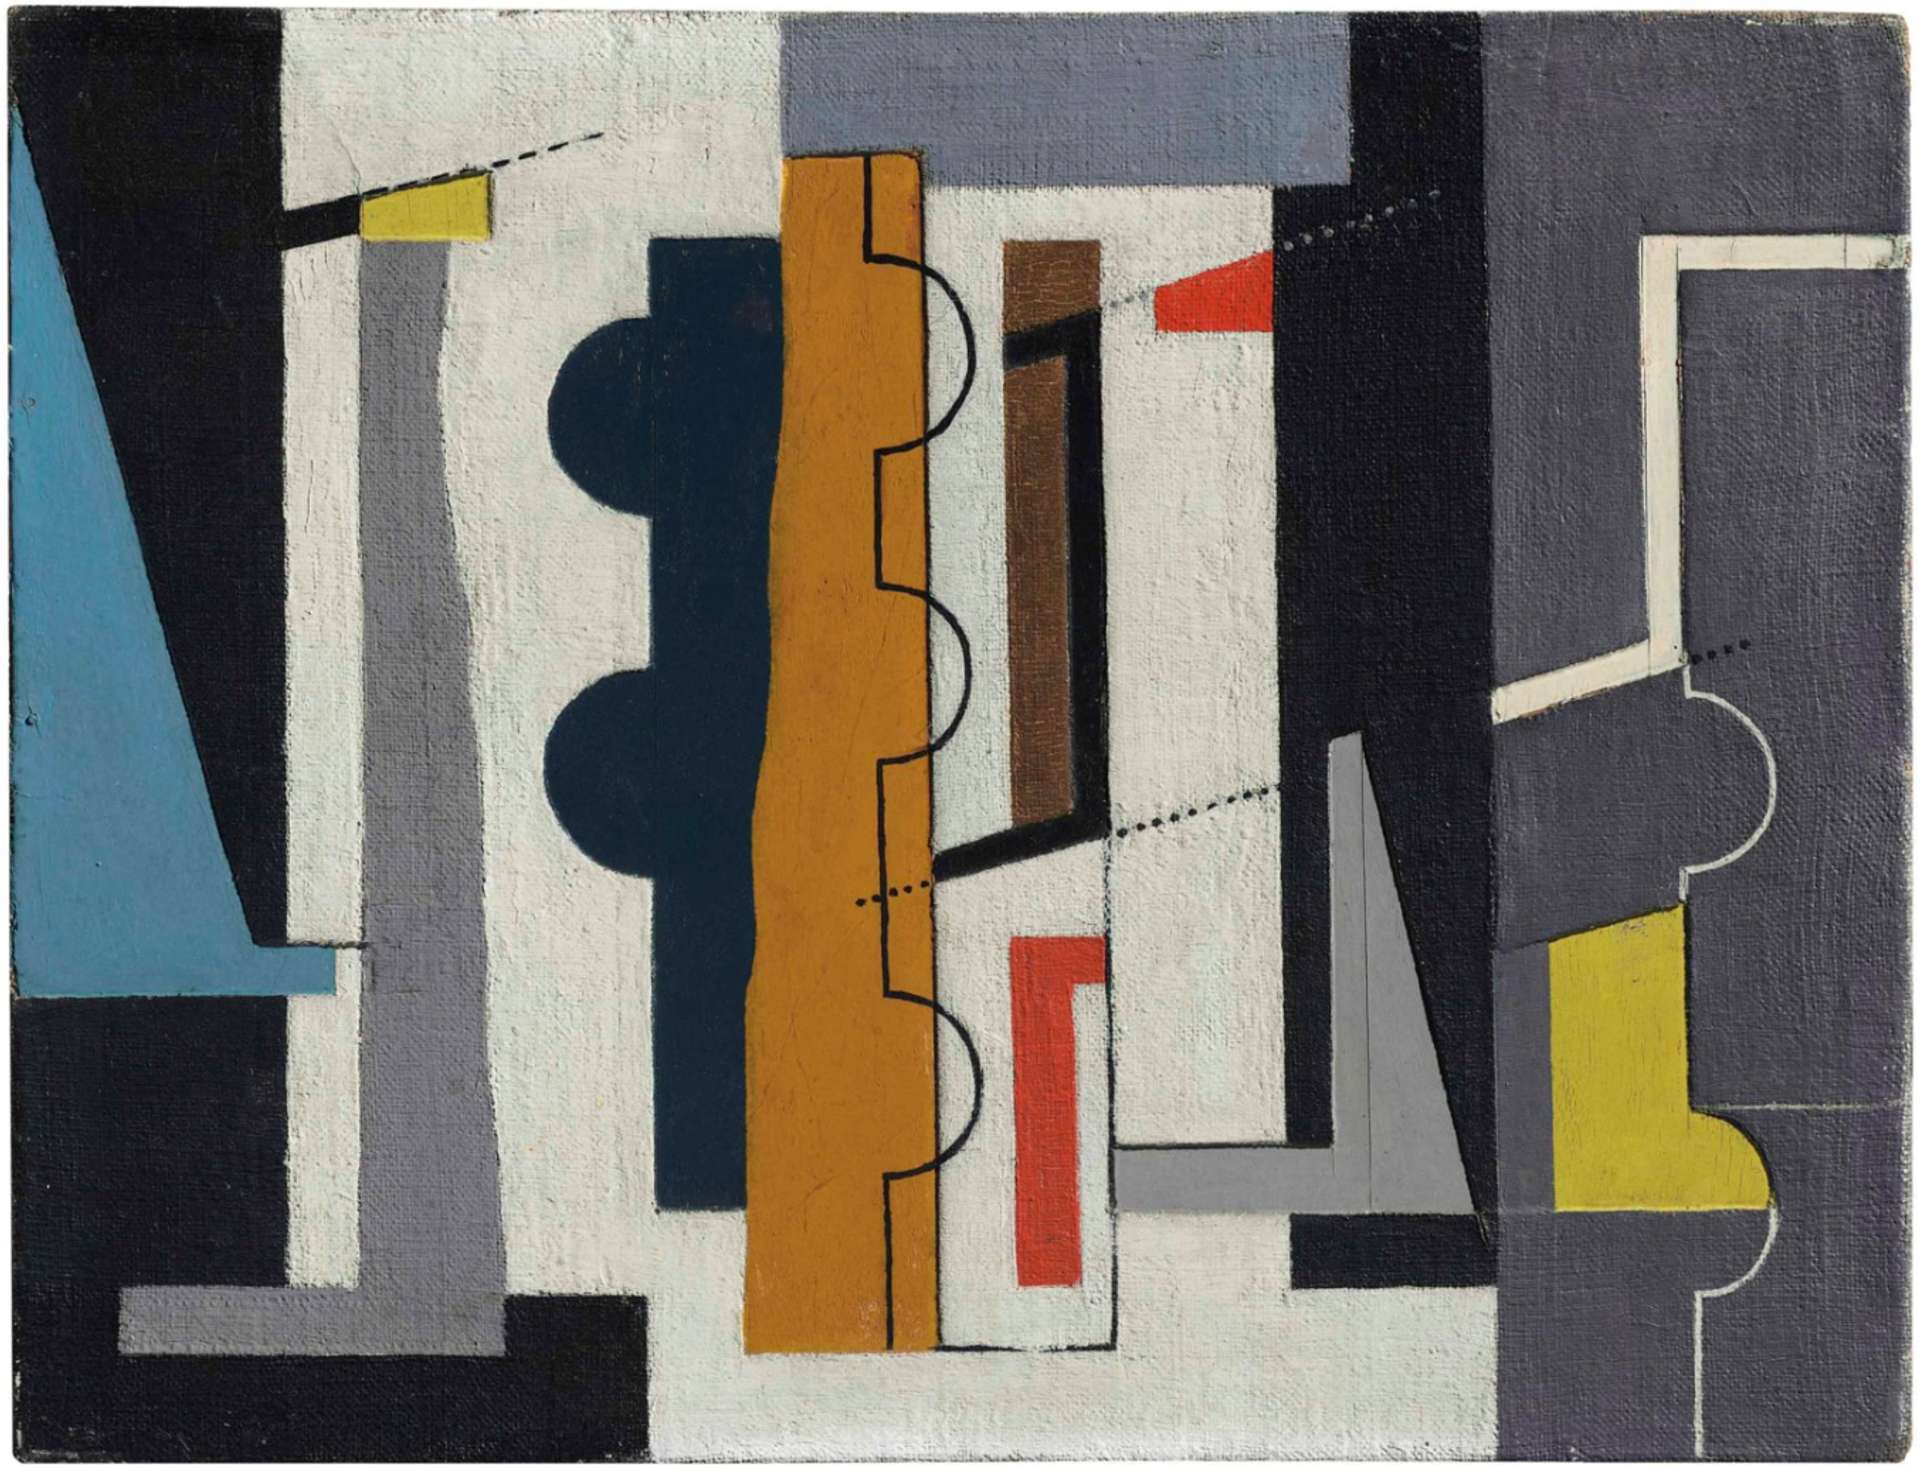 Abstract canvas with blues, black, grey, purple, and white, highlighted by pops of orange and yellow. The composition consists of vertical formations from right to left, divided into horizontal geometric shapes by overlapping black lines.